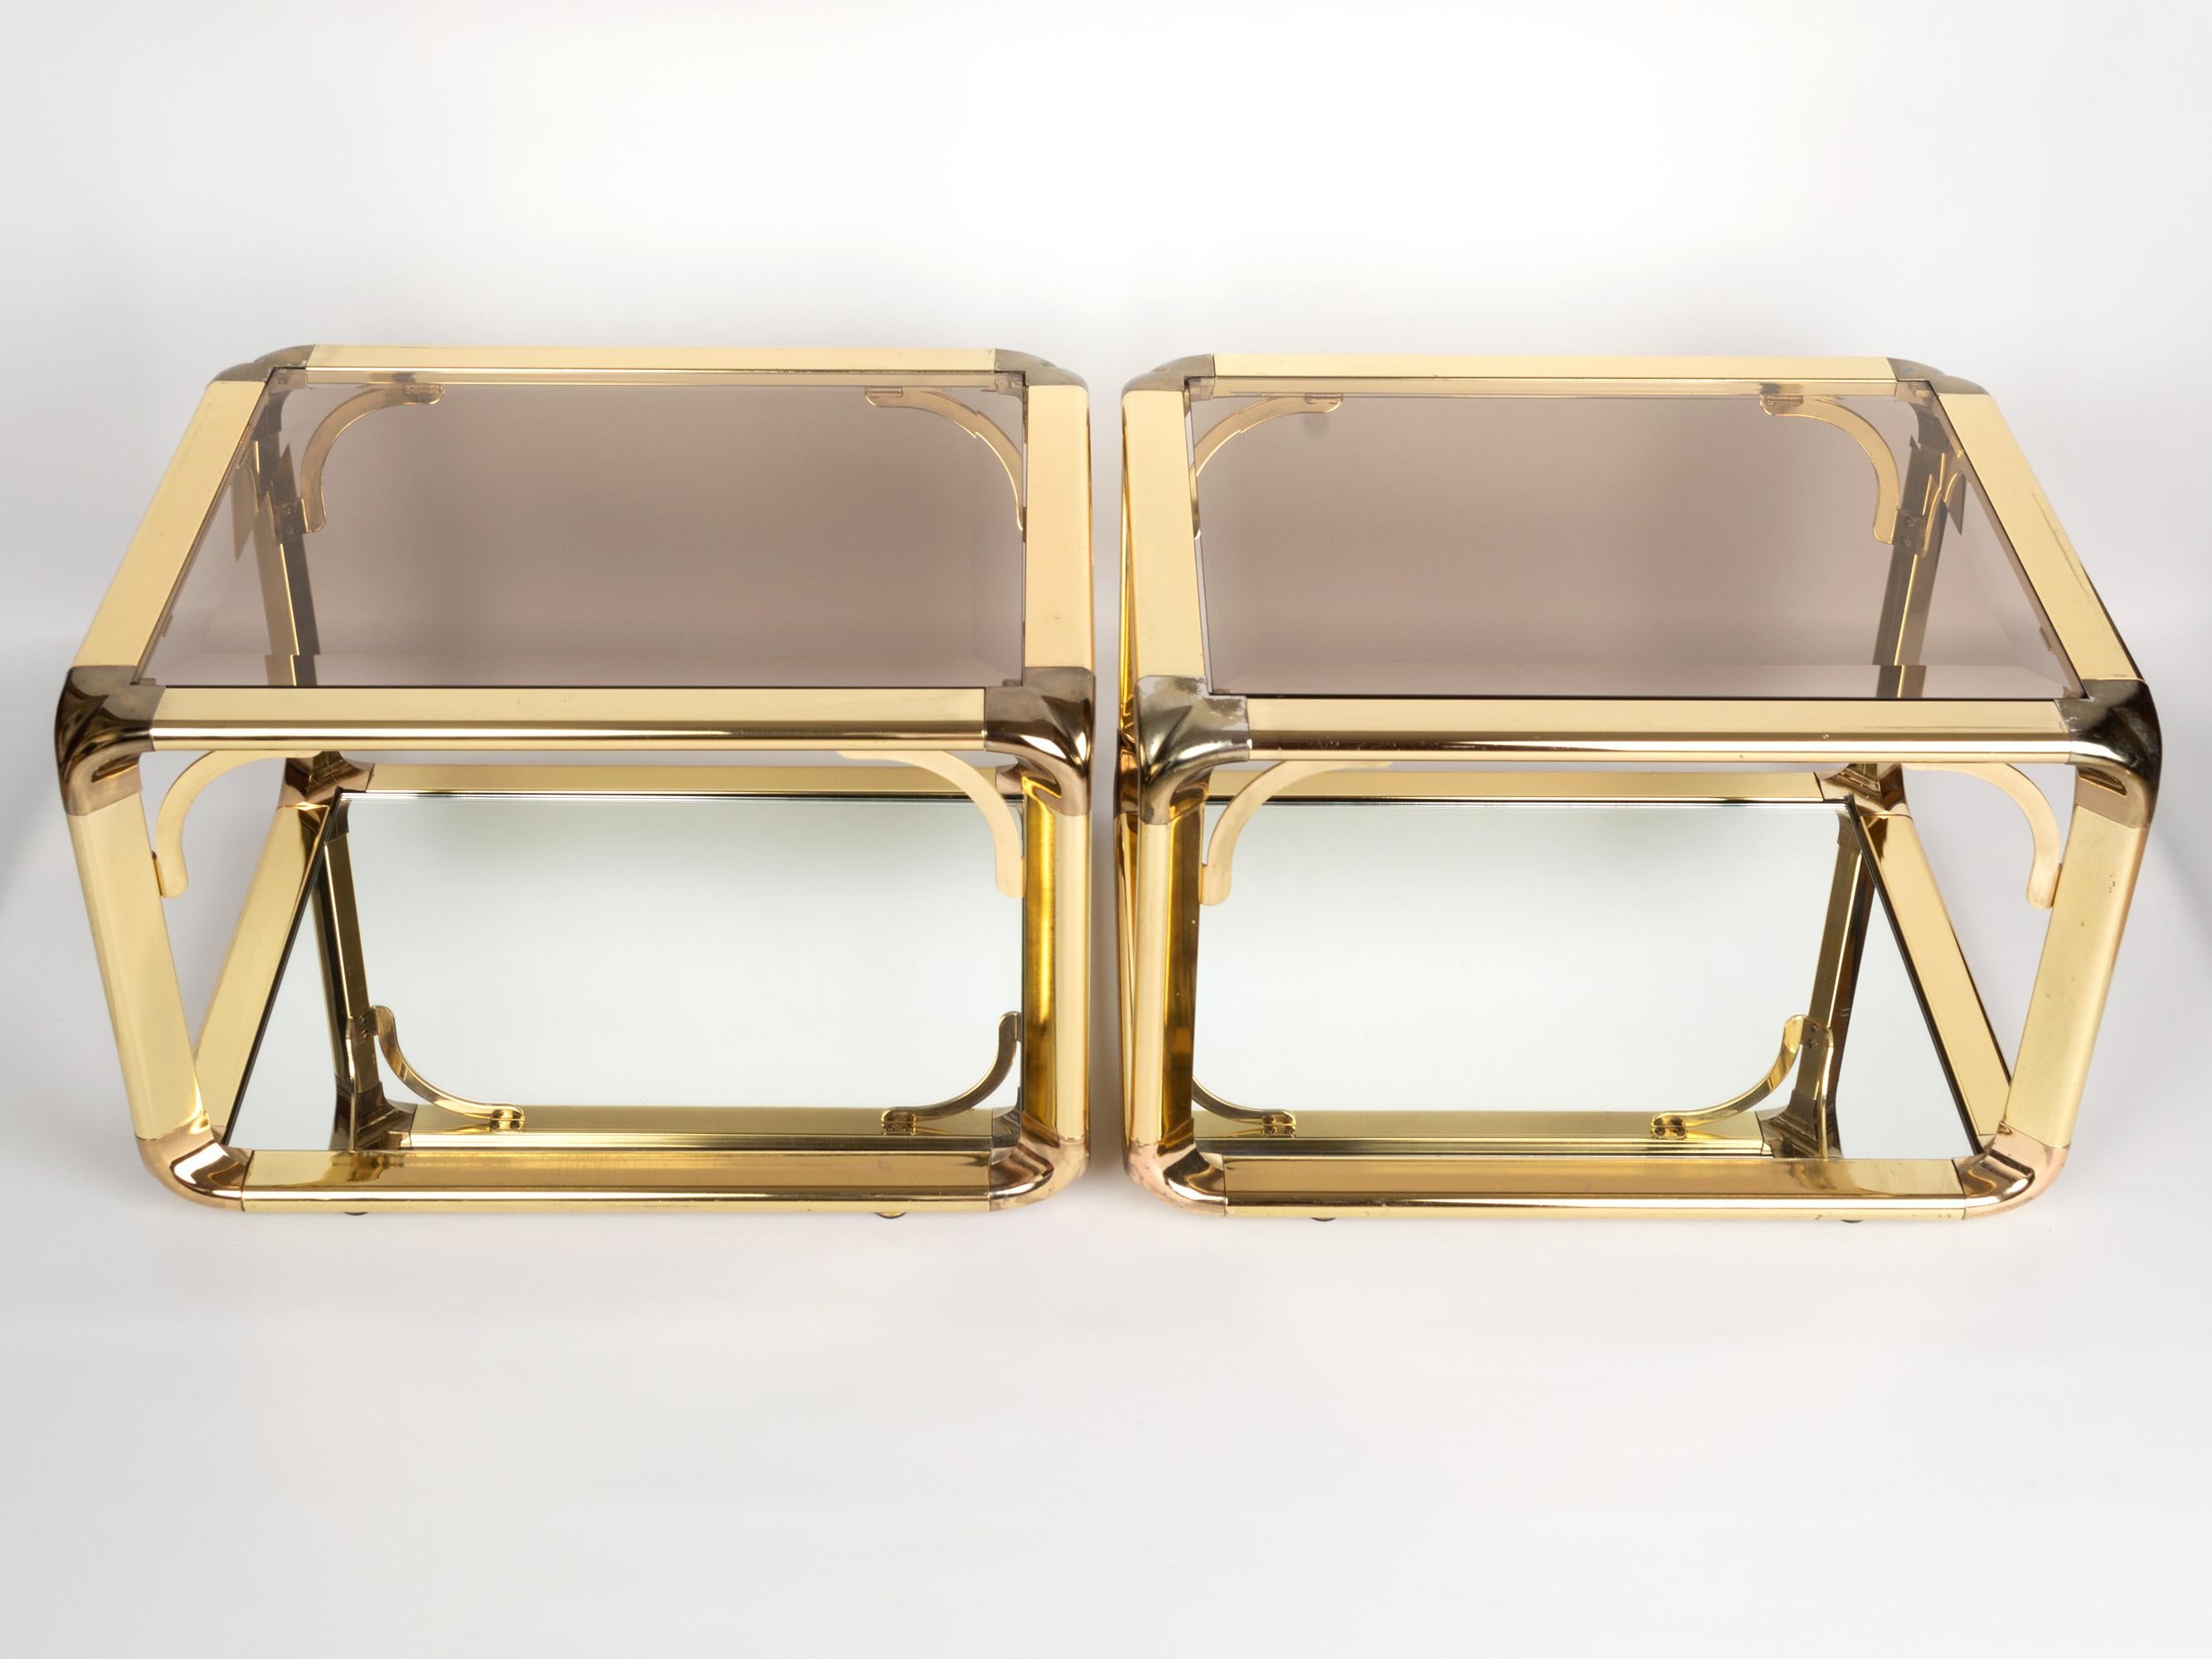 Belgian Pair of Mirrored Gold Chrome End Tables / Side Tables, Belgium, circa 1970 For Sale